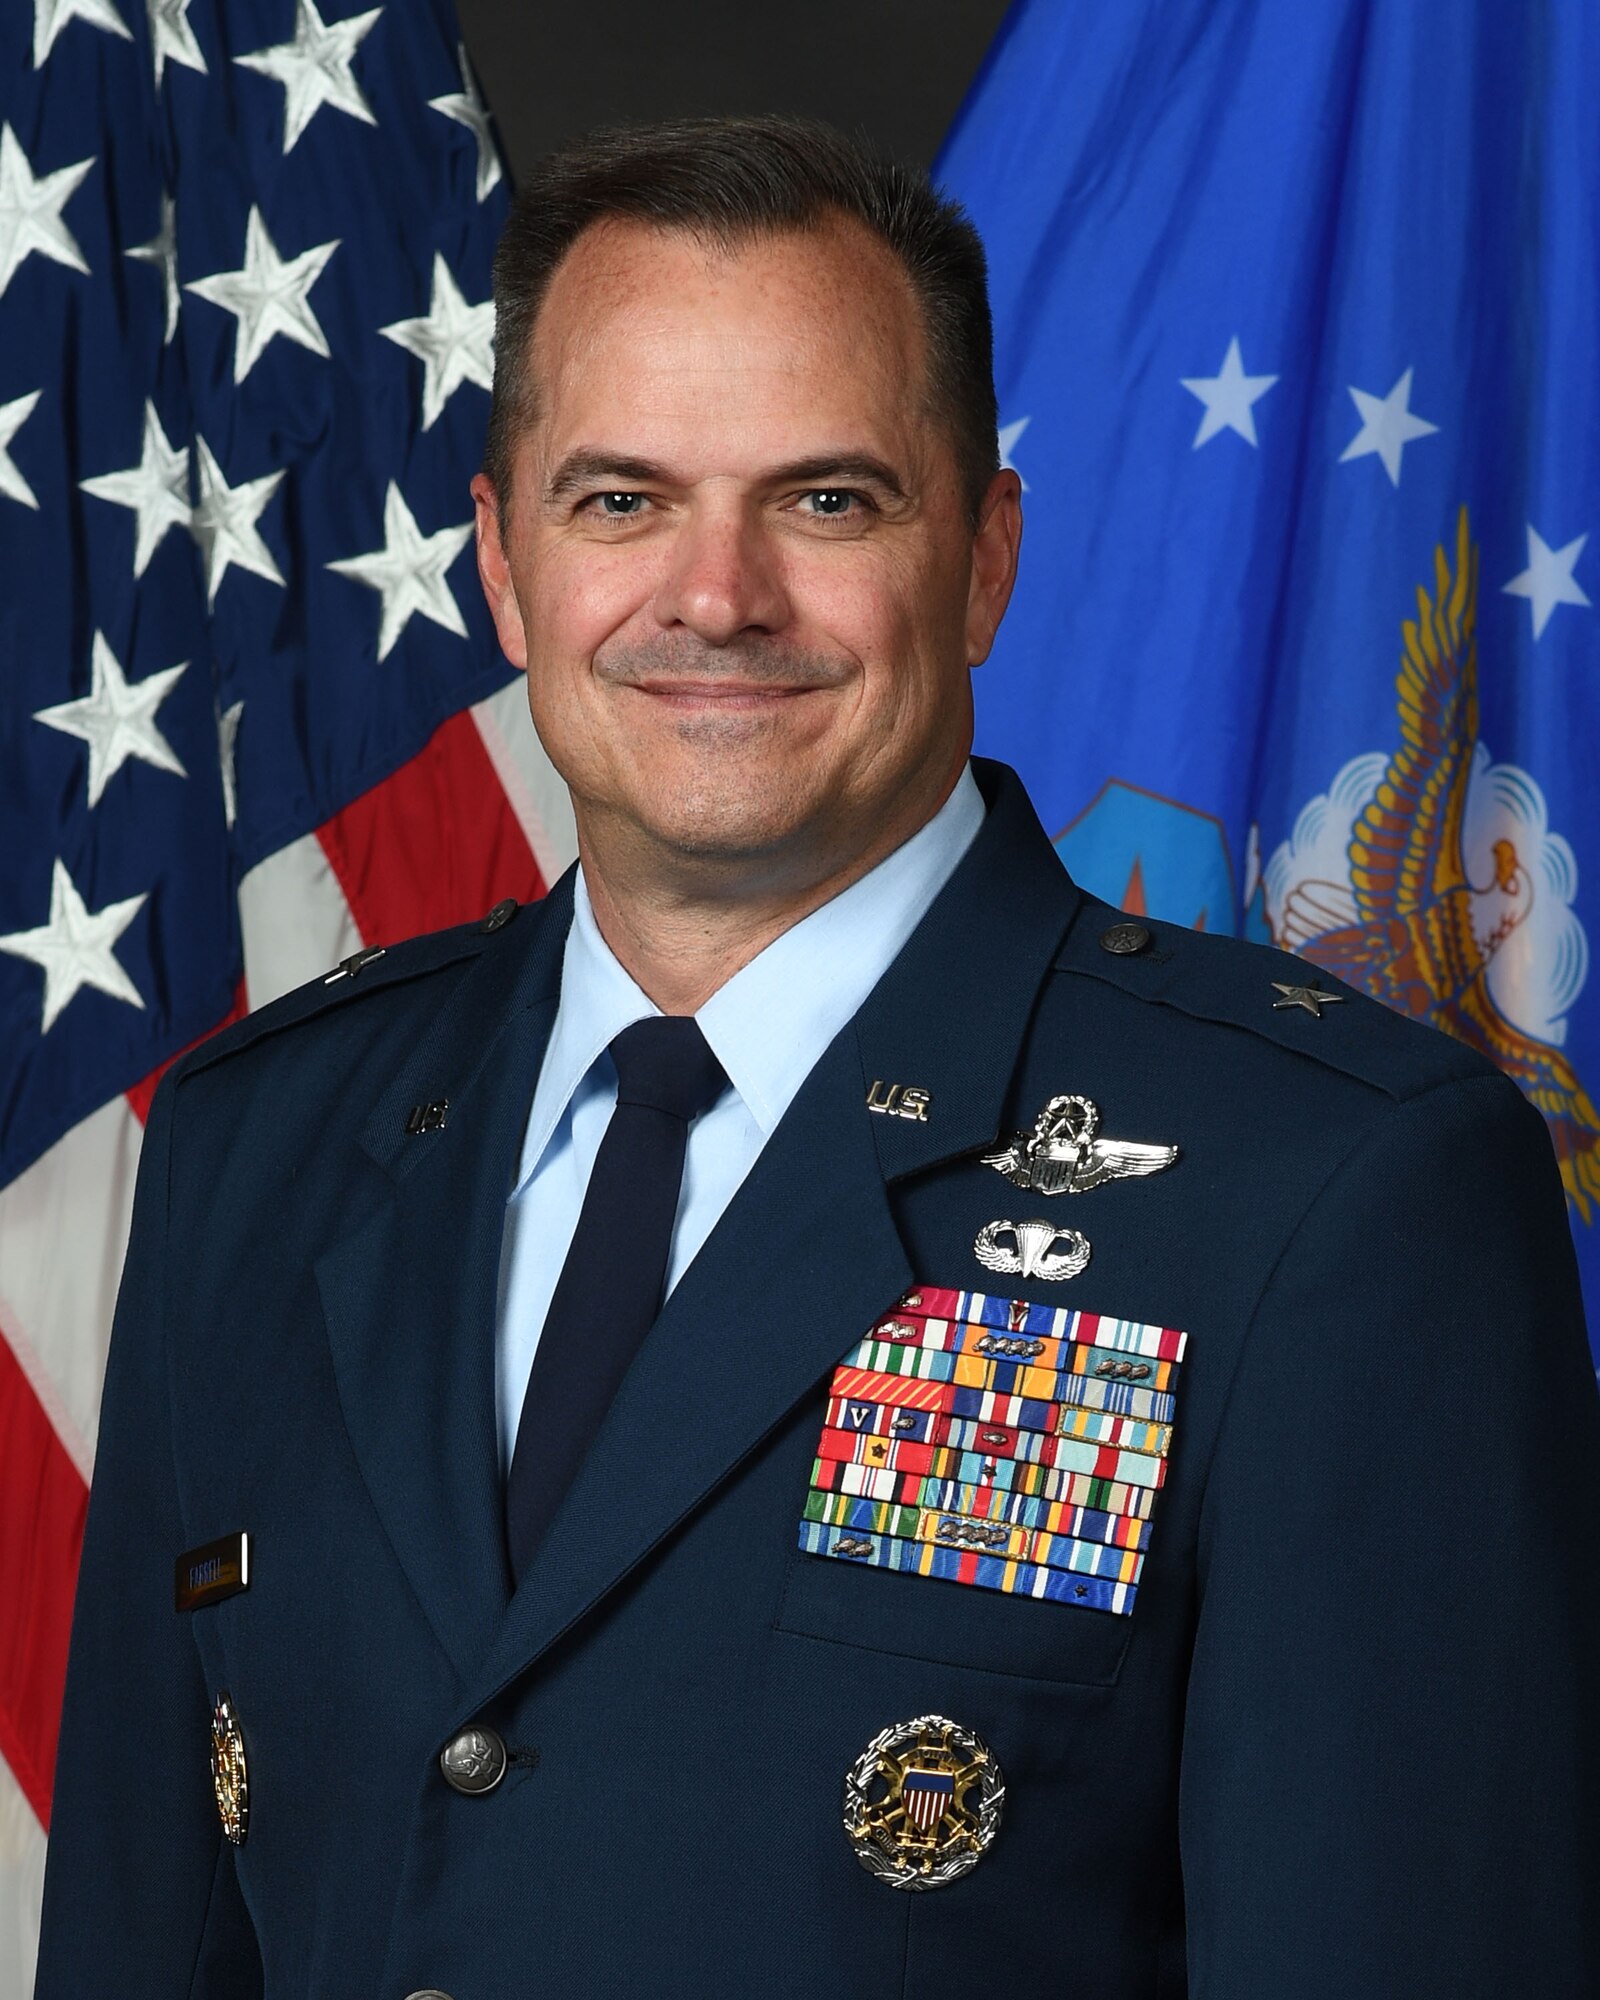 Brig. Gen. Sean Farrell, director of the Air Force Security Assistance and Cooperation Directorate headquartered at Wright-Patterson Air Force Base, Ohio, recently highlighted his vision for the organization during an interview with public affairs.